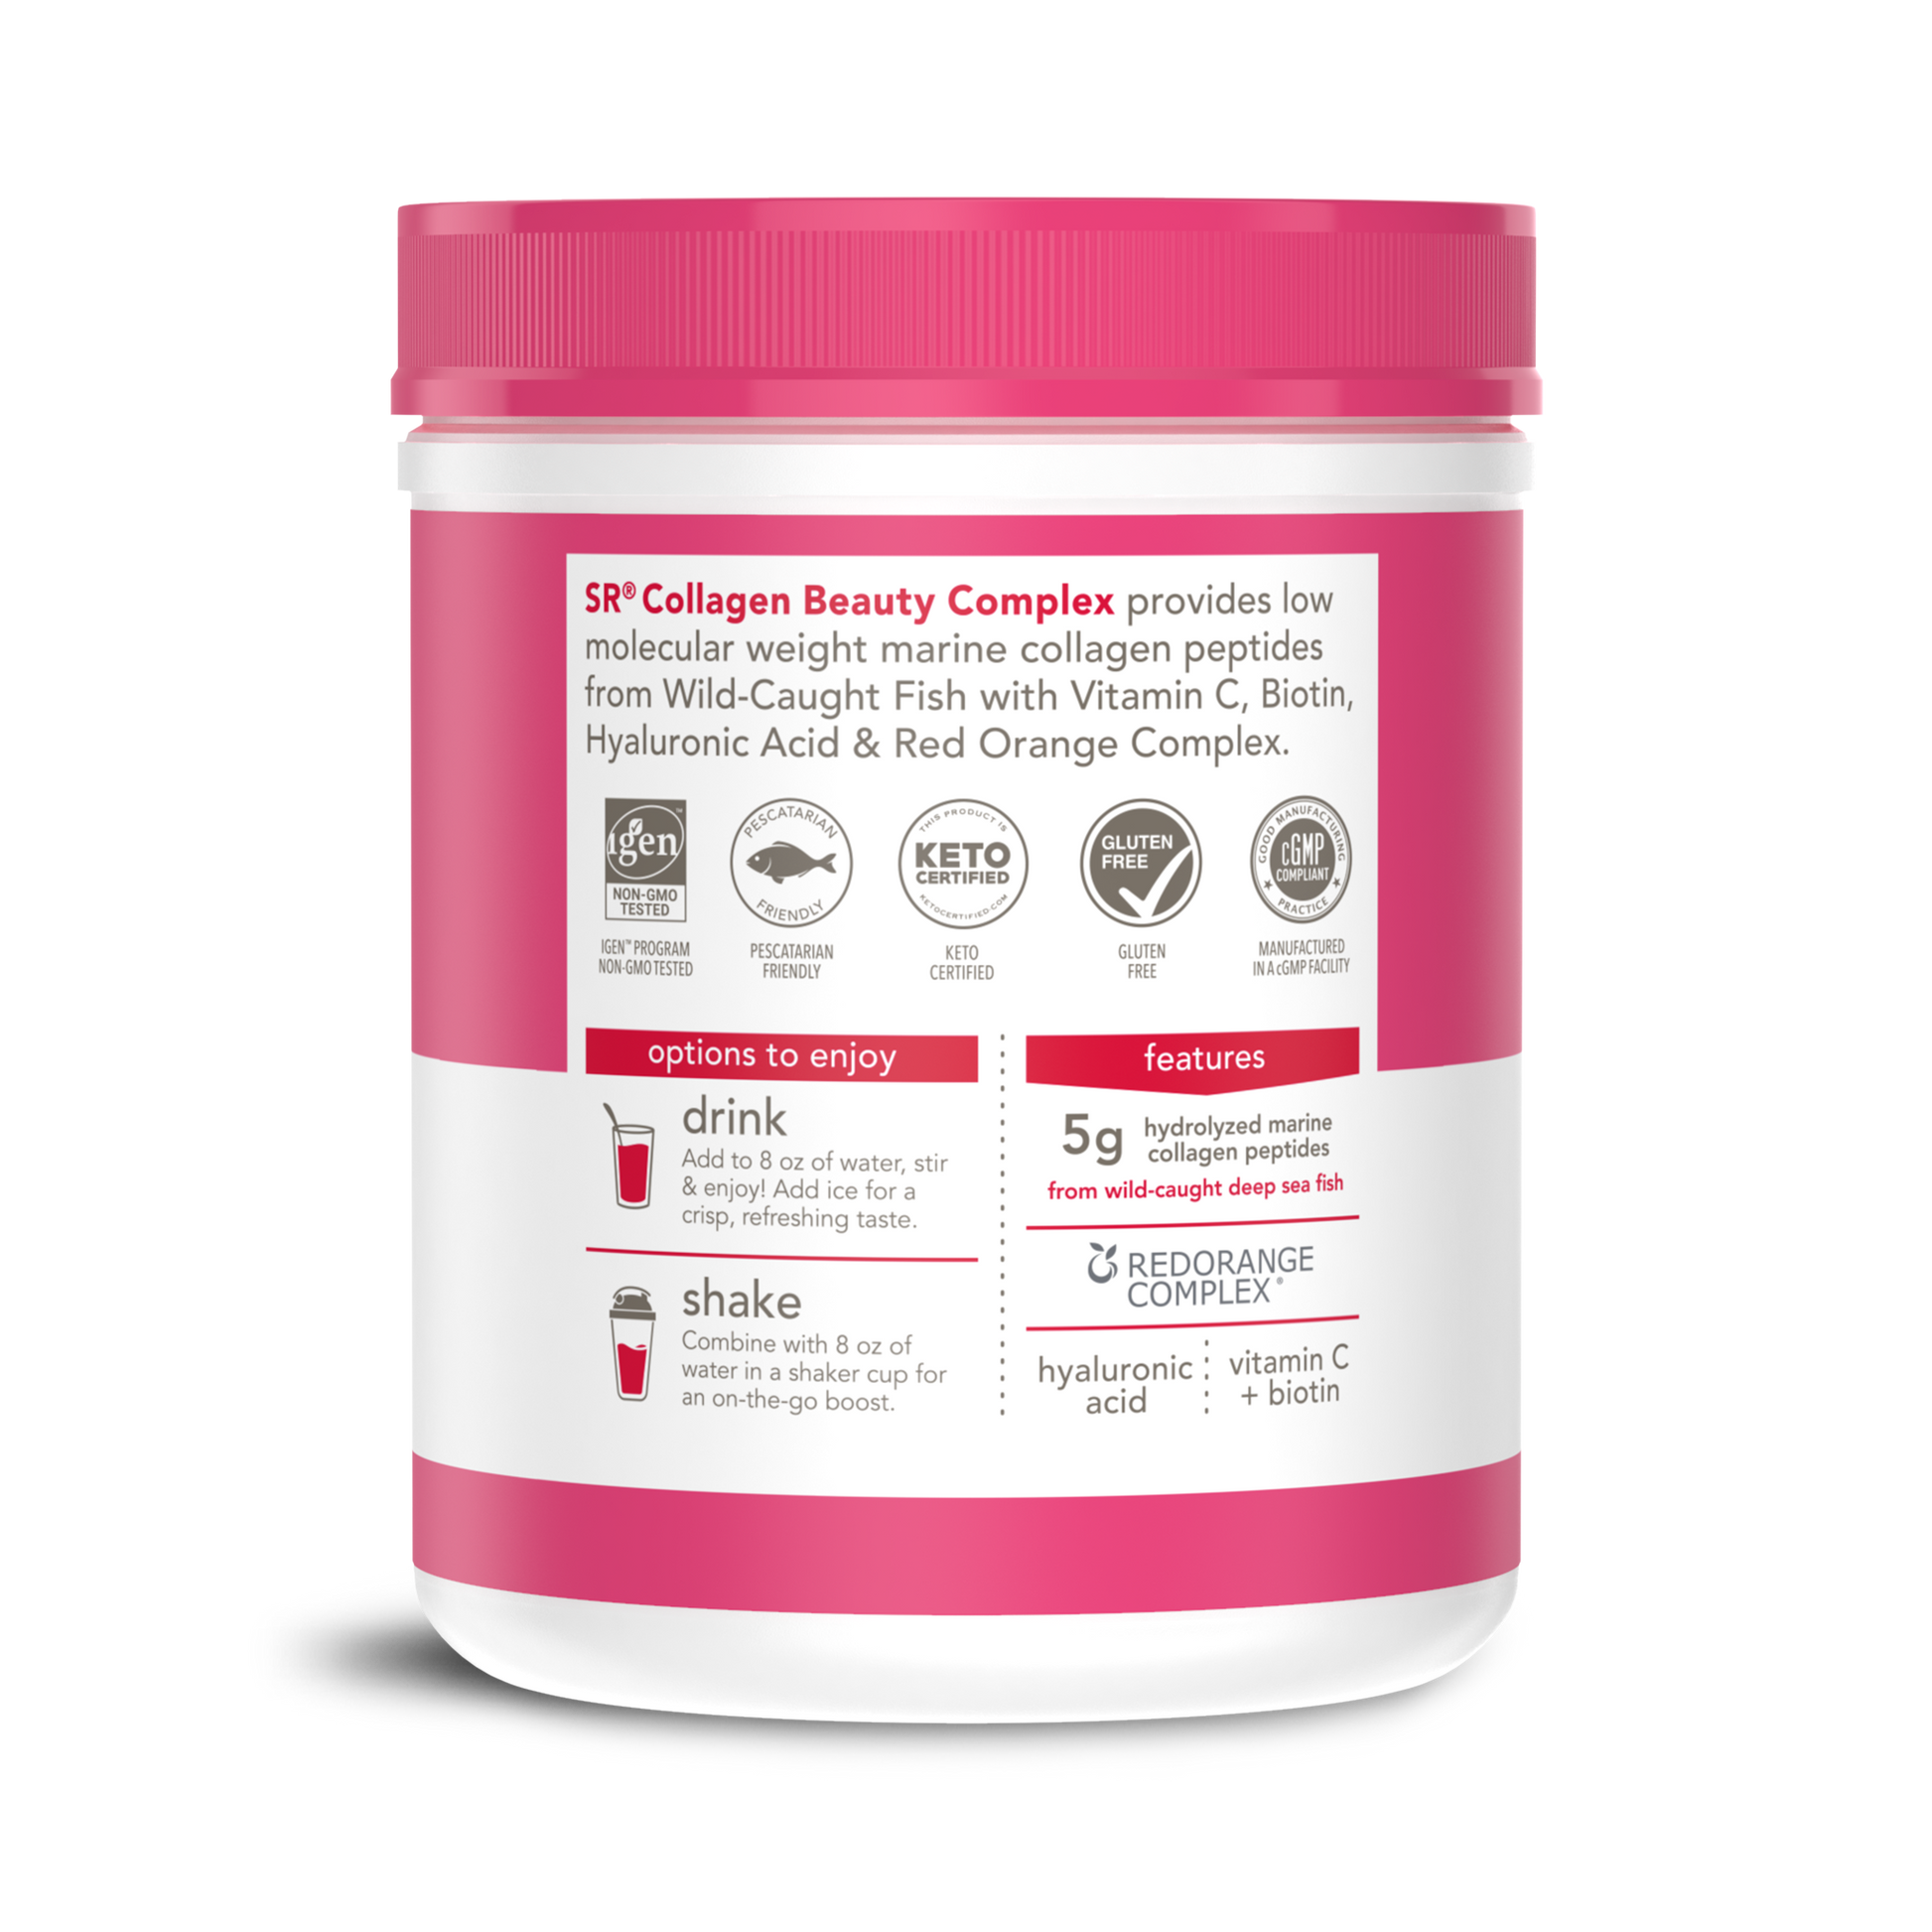 a pink and white container of Sports Research Marine Collagen Complex with Hyaluronic Acid, with white text and red label.